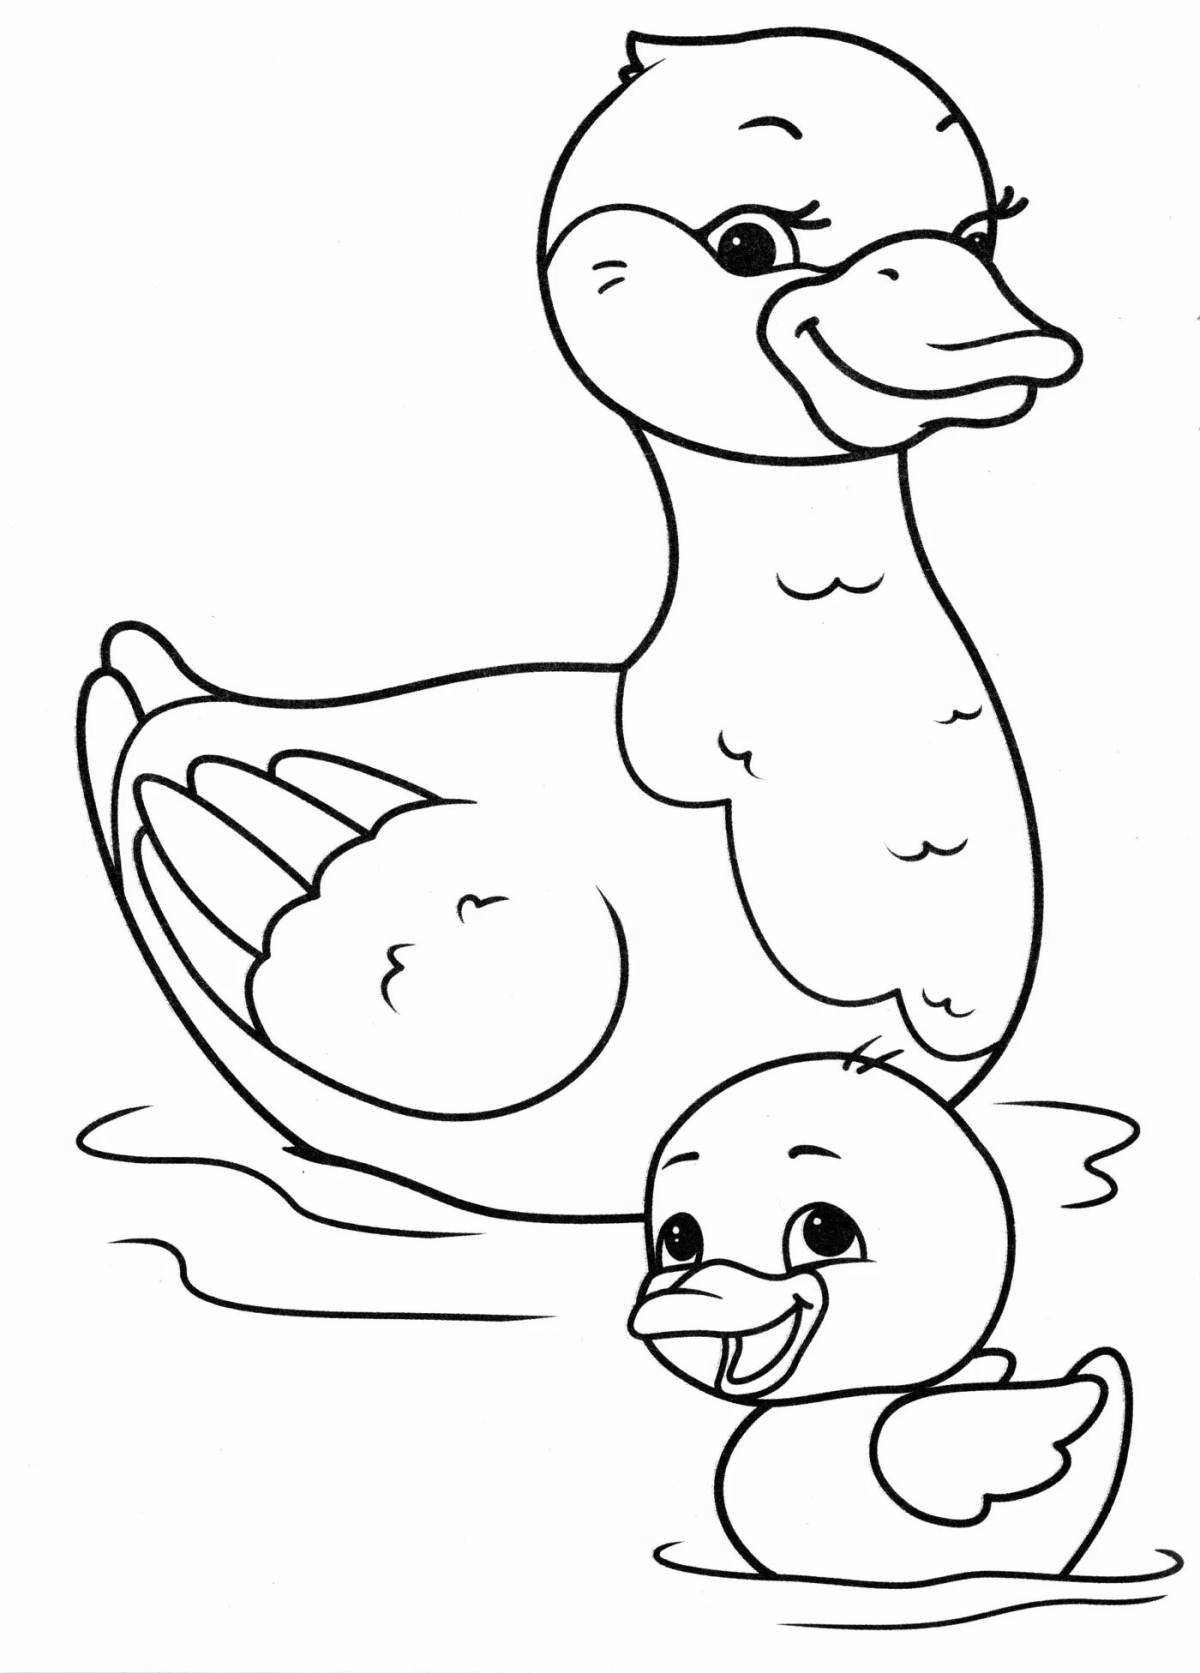 Coloring page adorable little duck